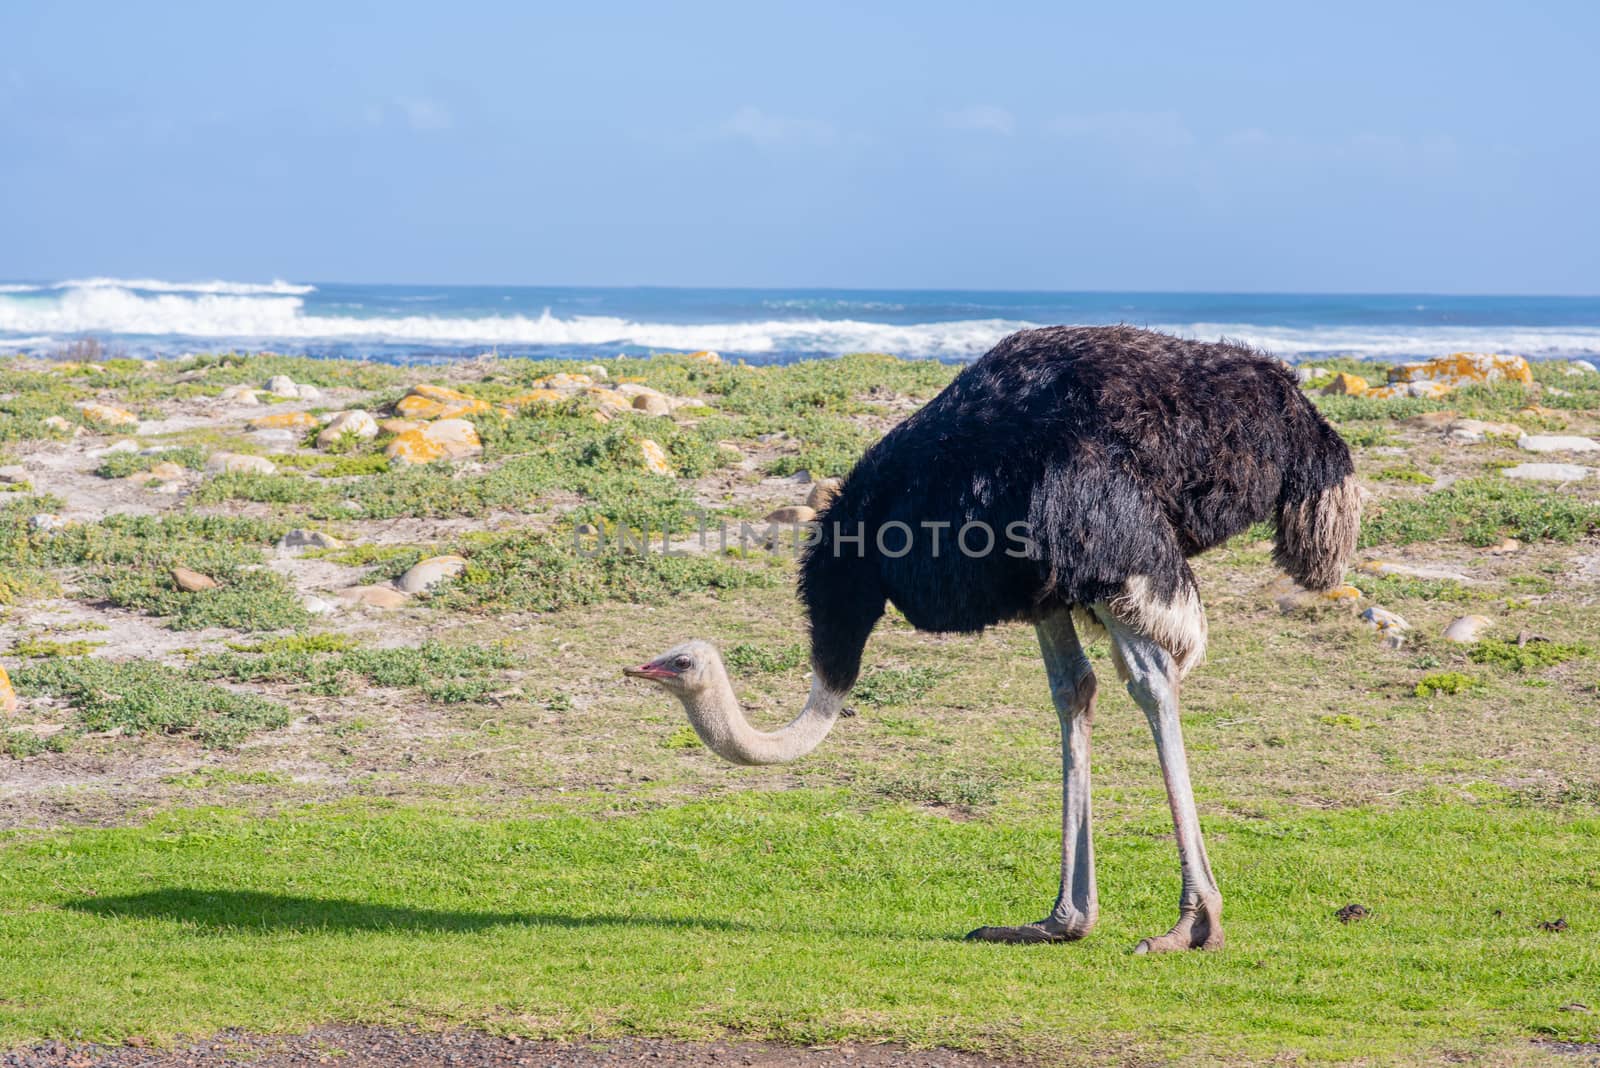 Ostrich searching for food with crashing waves in background